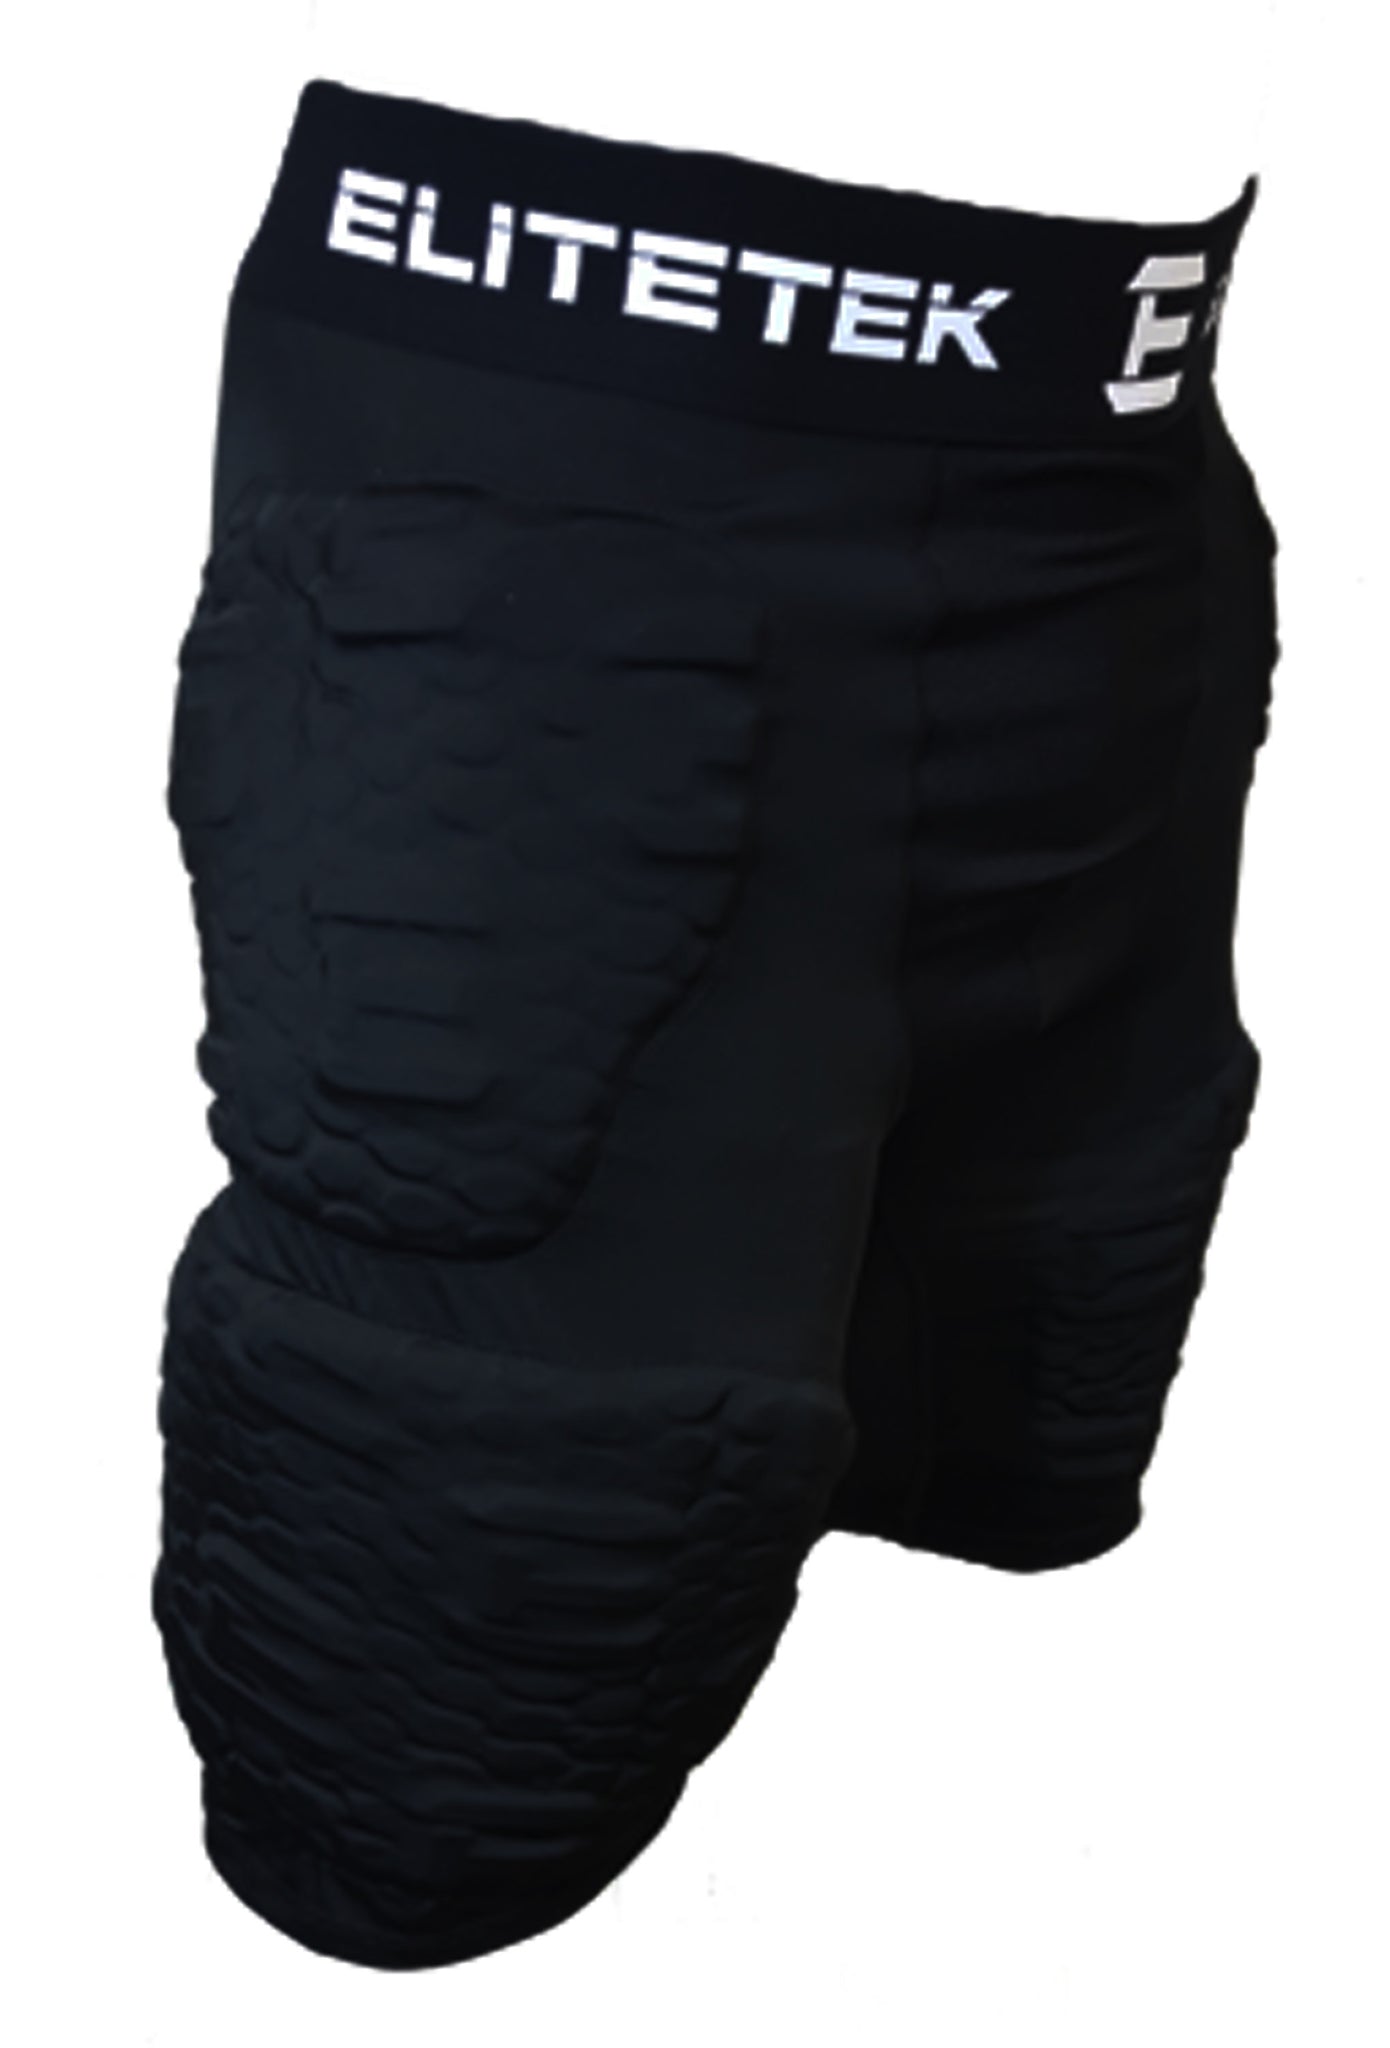 PS16 Padded Compression Shorts